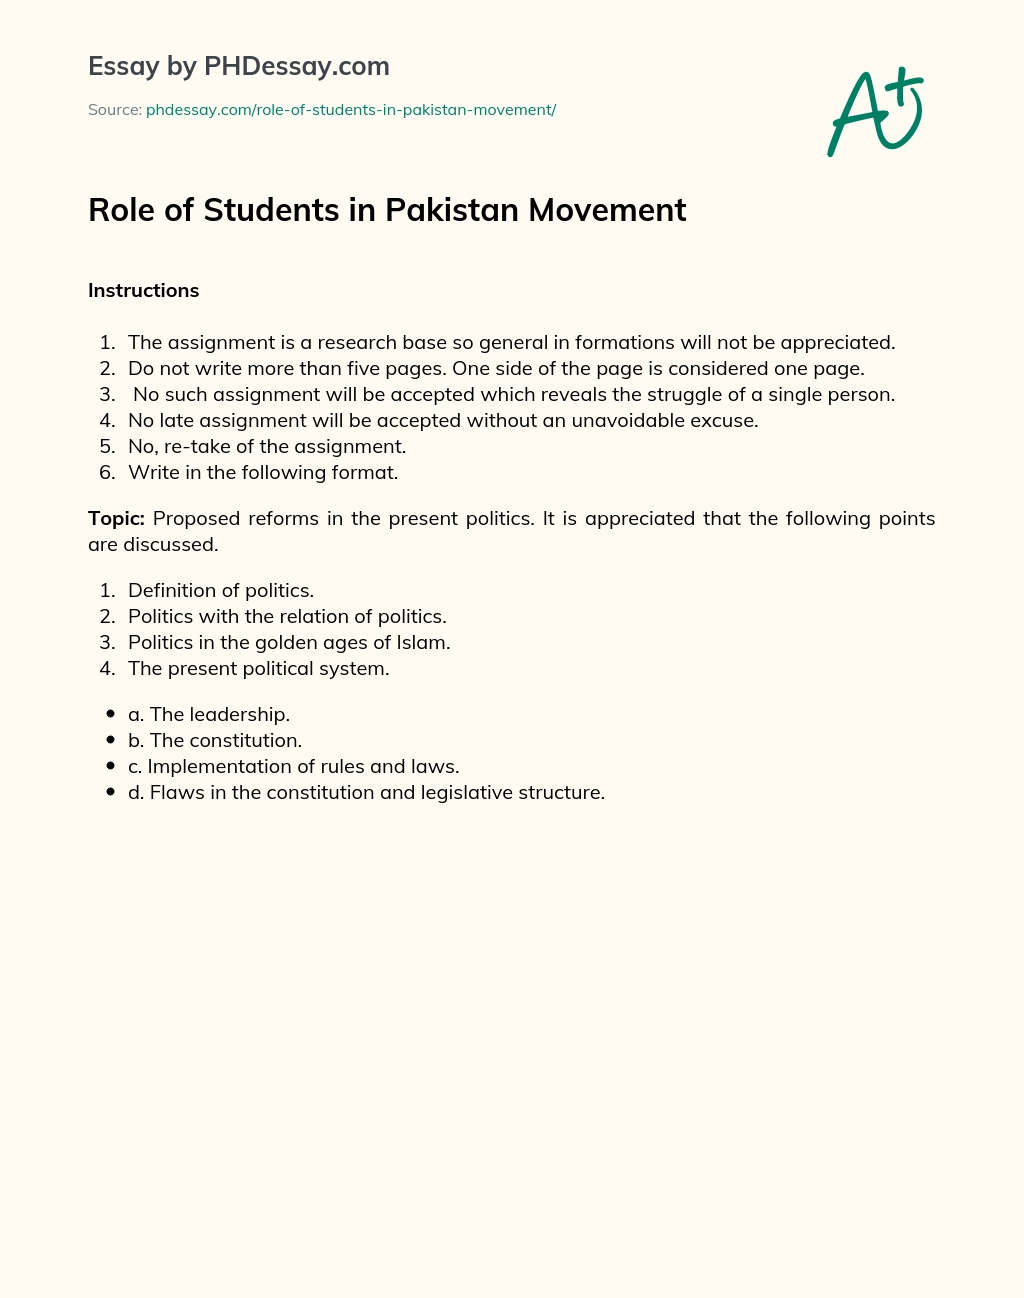 Role of Students in Pakistan Movement essay